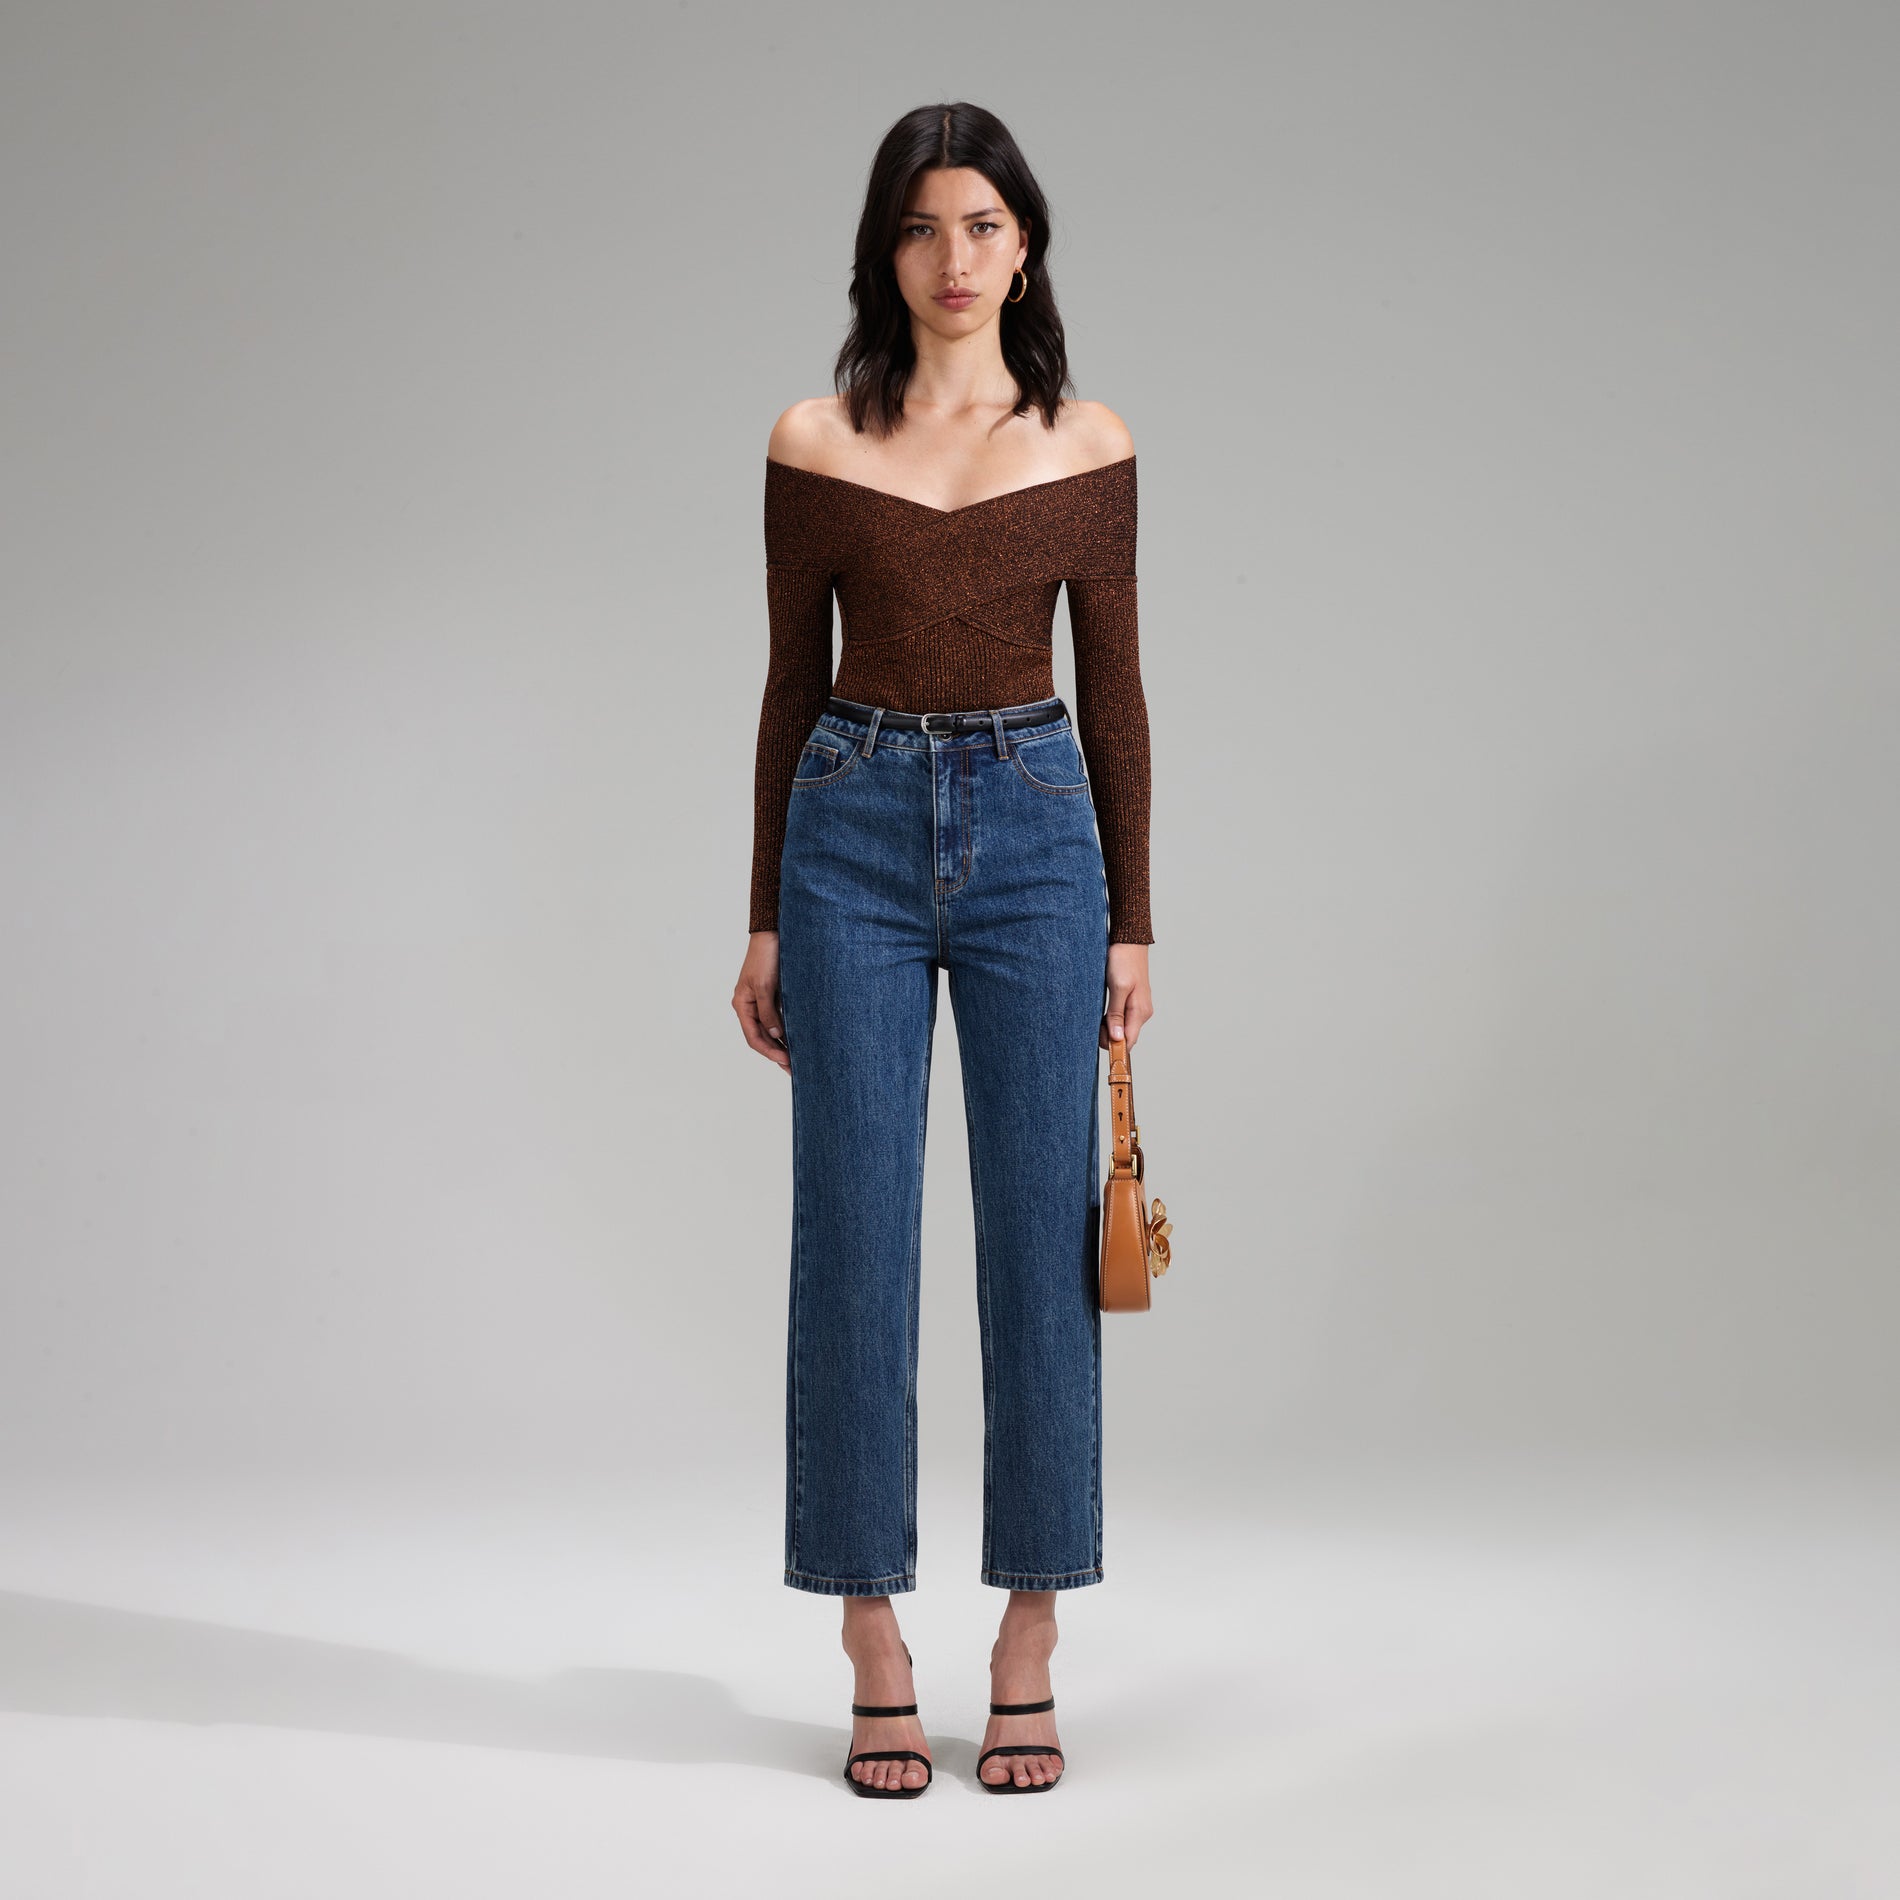 A woman wearing the Brown Lurex Knit Off Shoulder Top